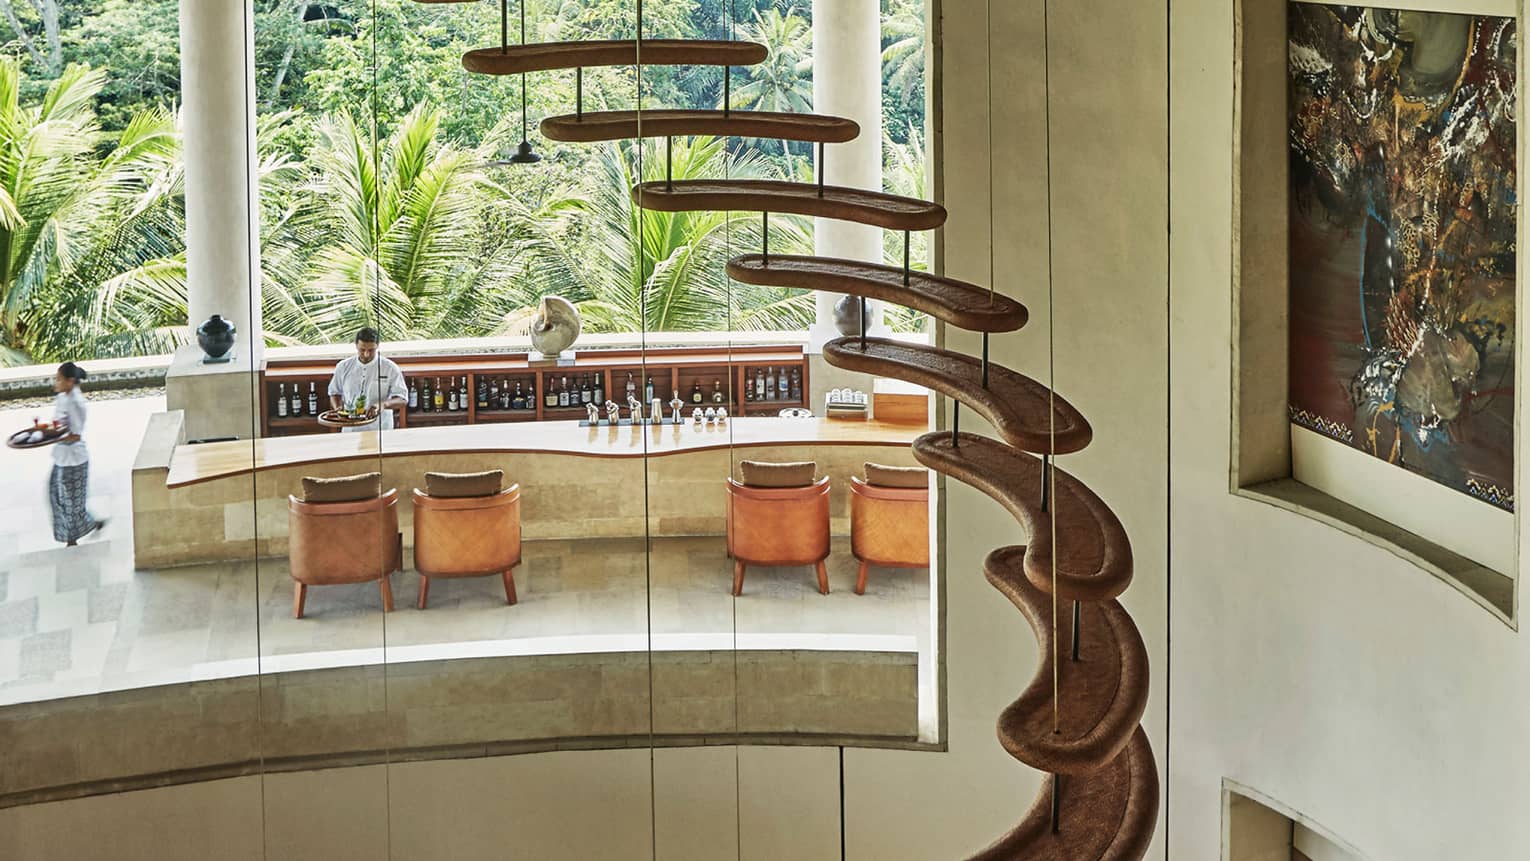 Winding staircase with curved, floating stairs, glass wall looking out at sunny Jati Bar patio, bartenders 